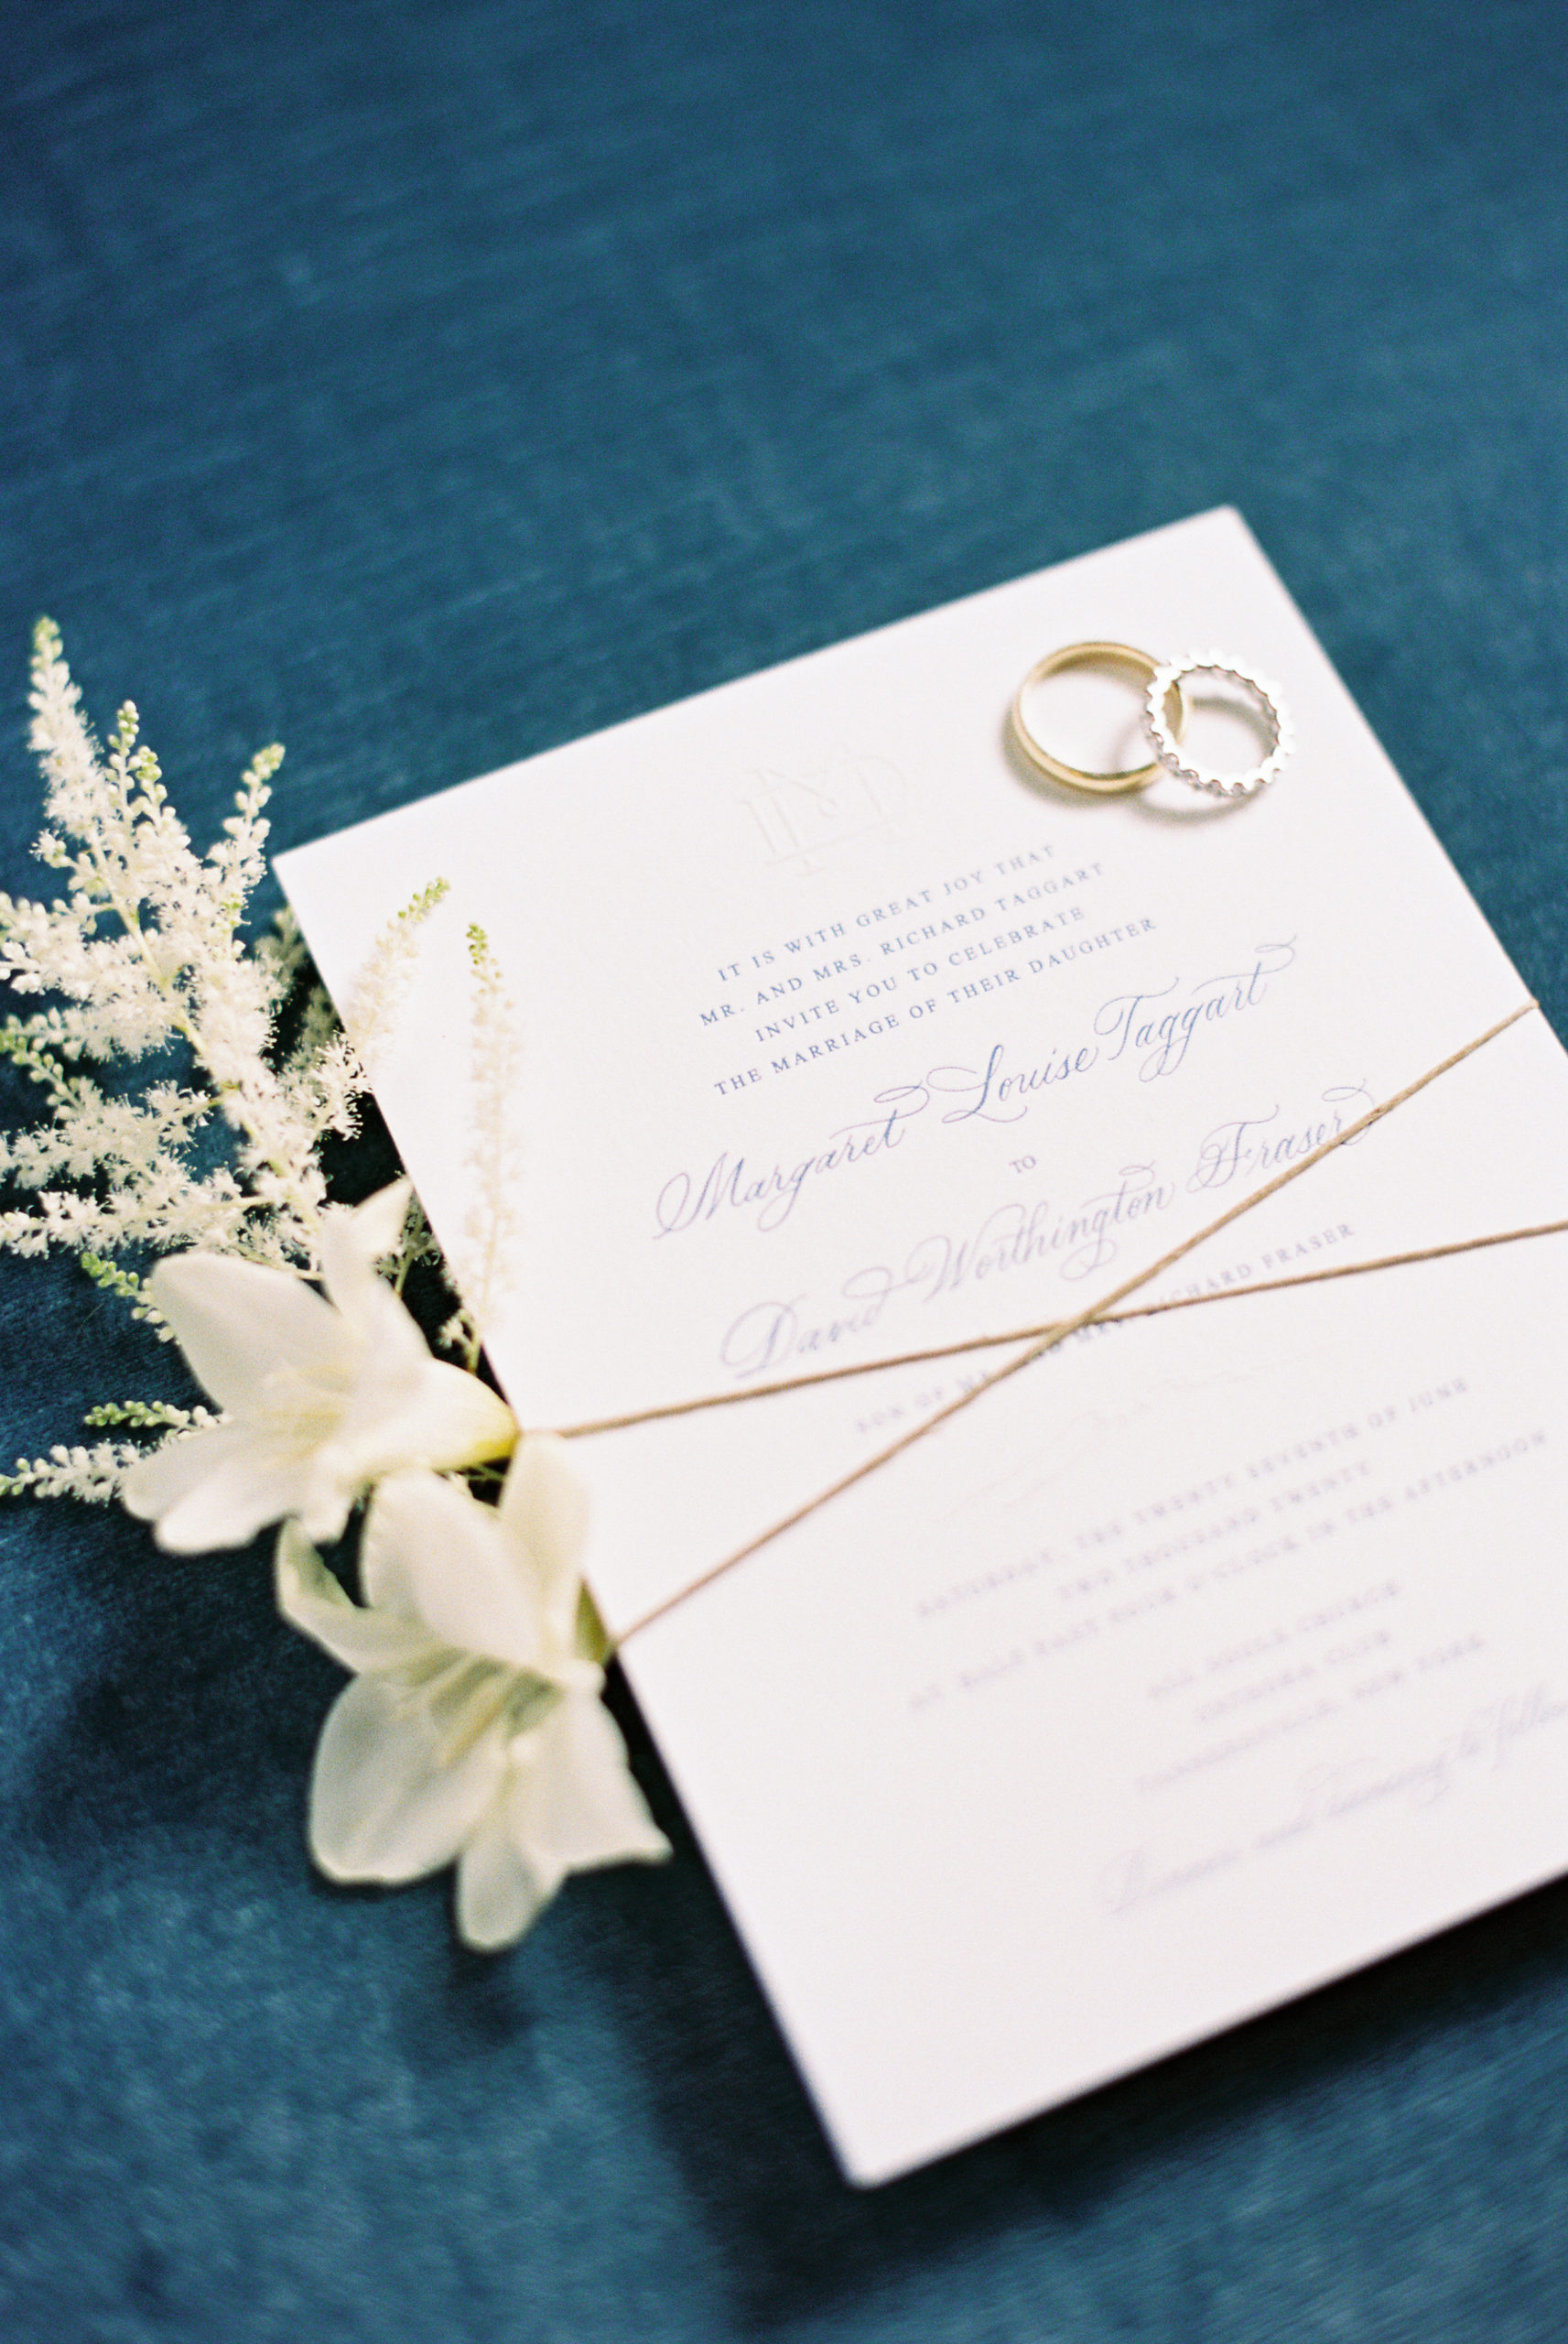 custom stationery wedding planning how to work with a custom stationer